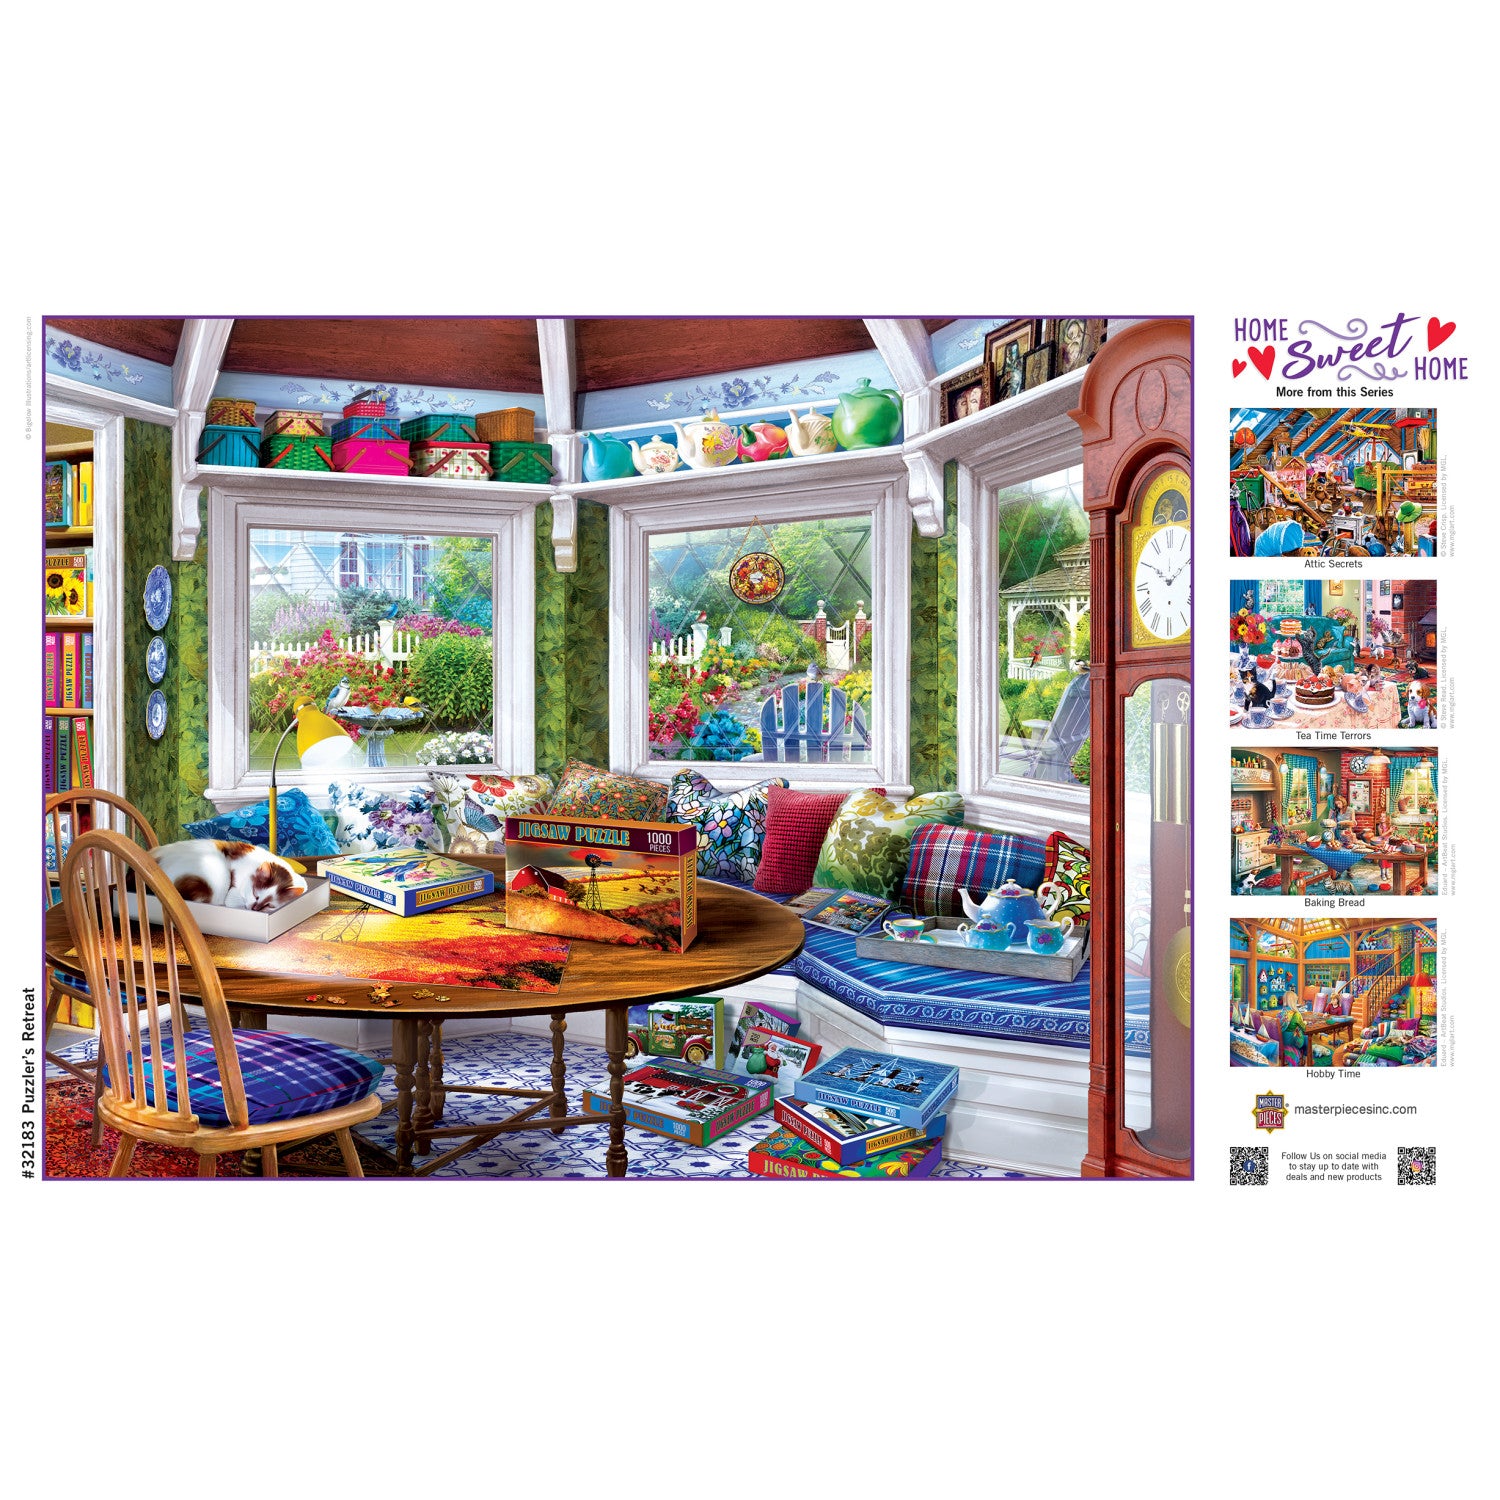 Home Sweet Home - Puzzler's Retreat 550 Piece Jigsaw Puzzle